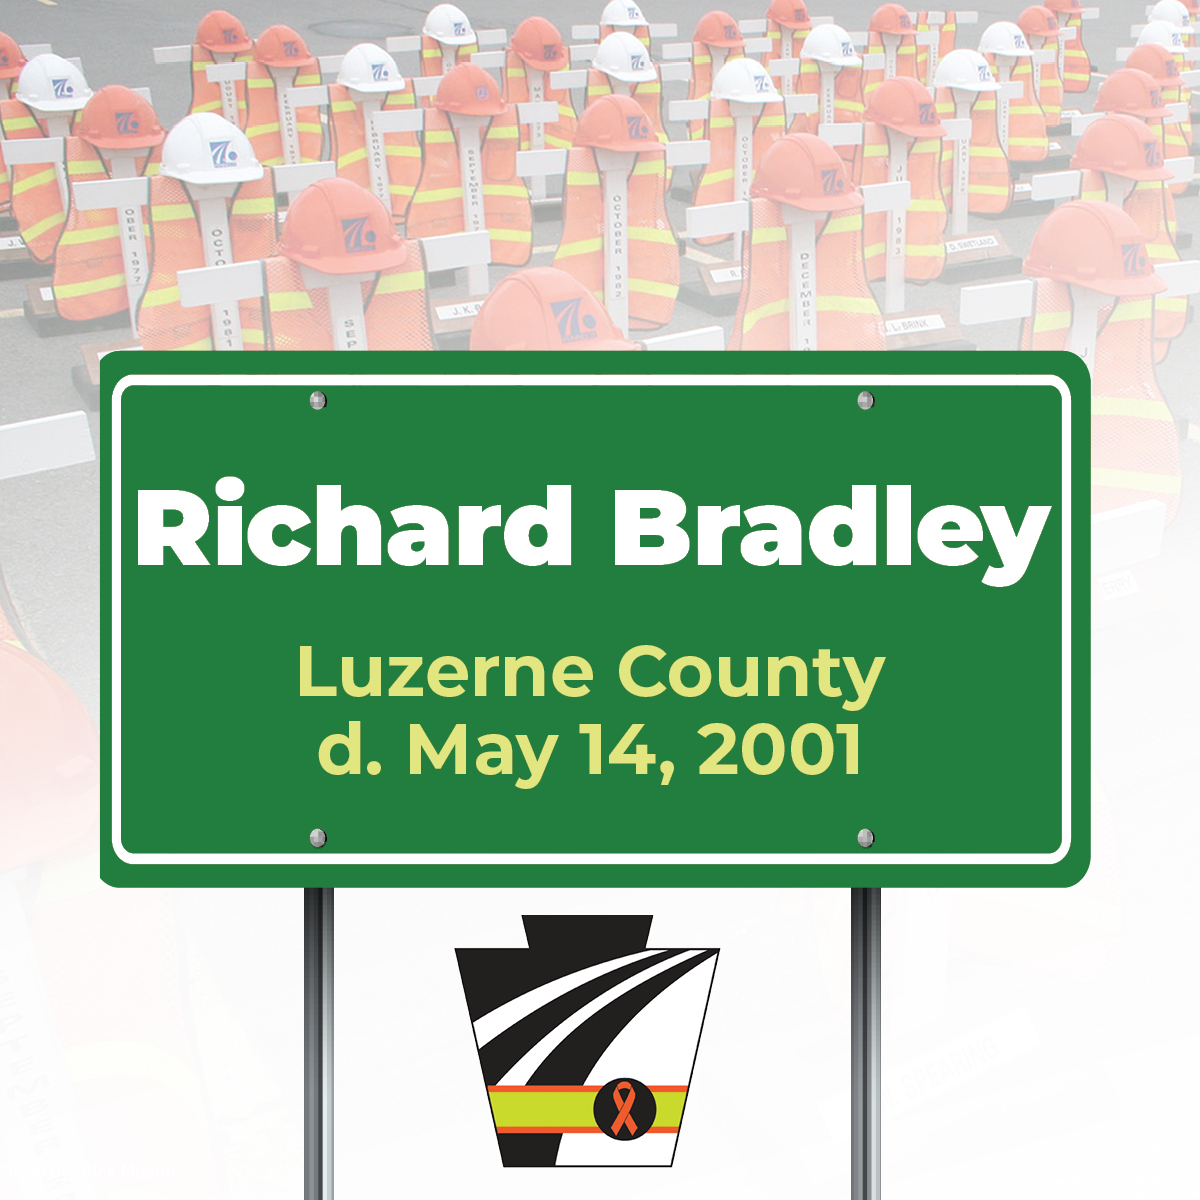 Today we remember Richard Bradley, a PennDOT employee who died in the line of duty in 2001. We pray this kind of heartbreak stays far removed from our PennDOT team. Please keep him in your thoughts and stay safe every workday. #WeRemember